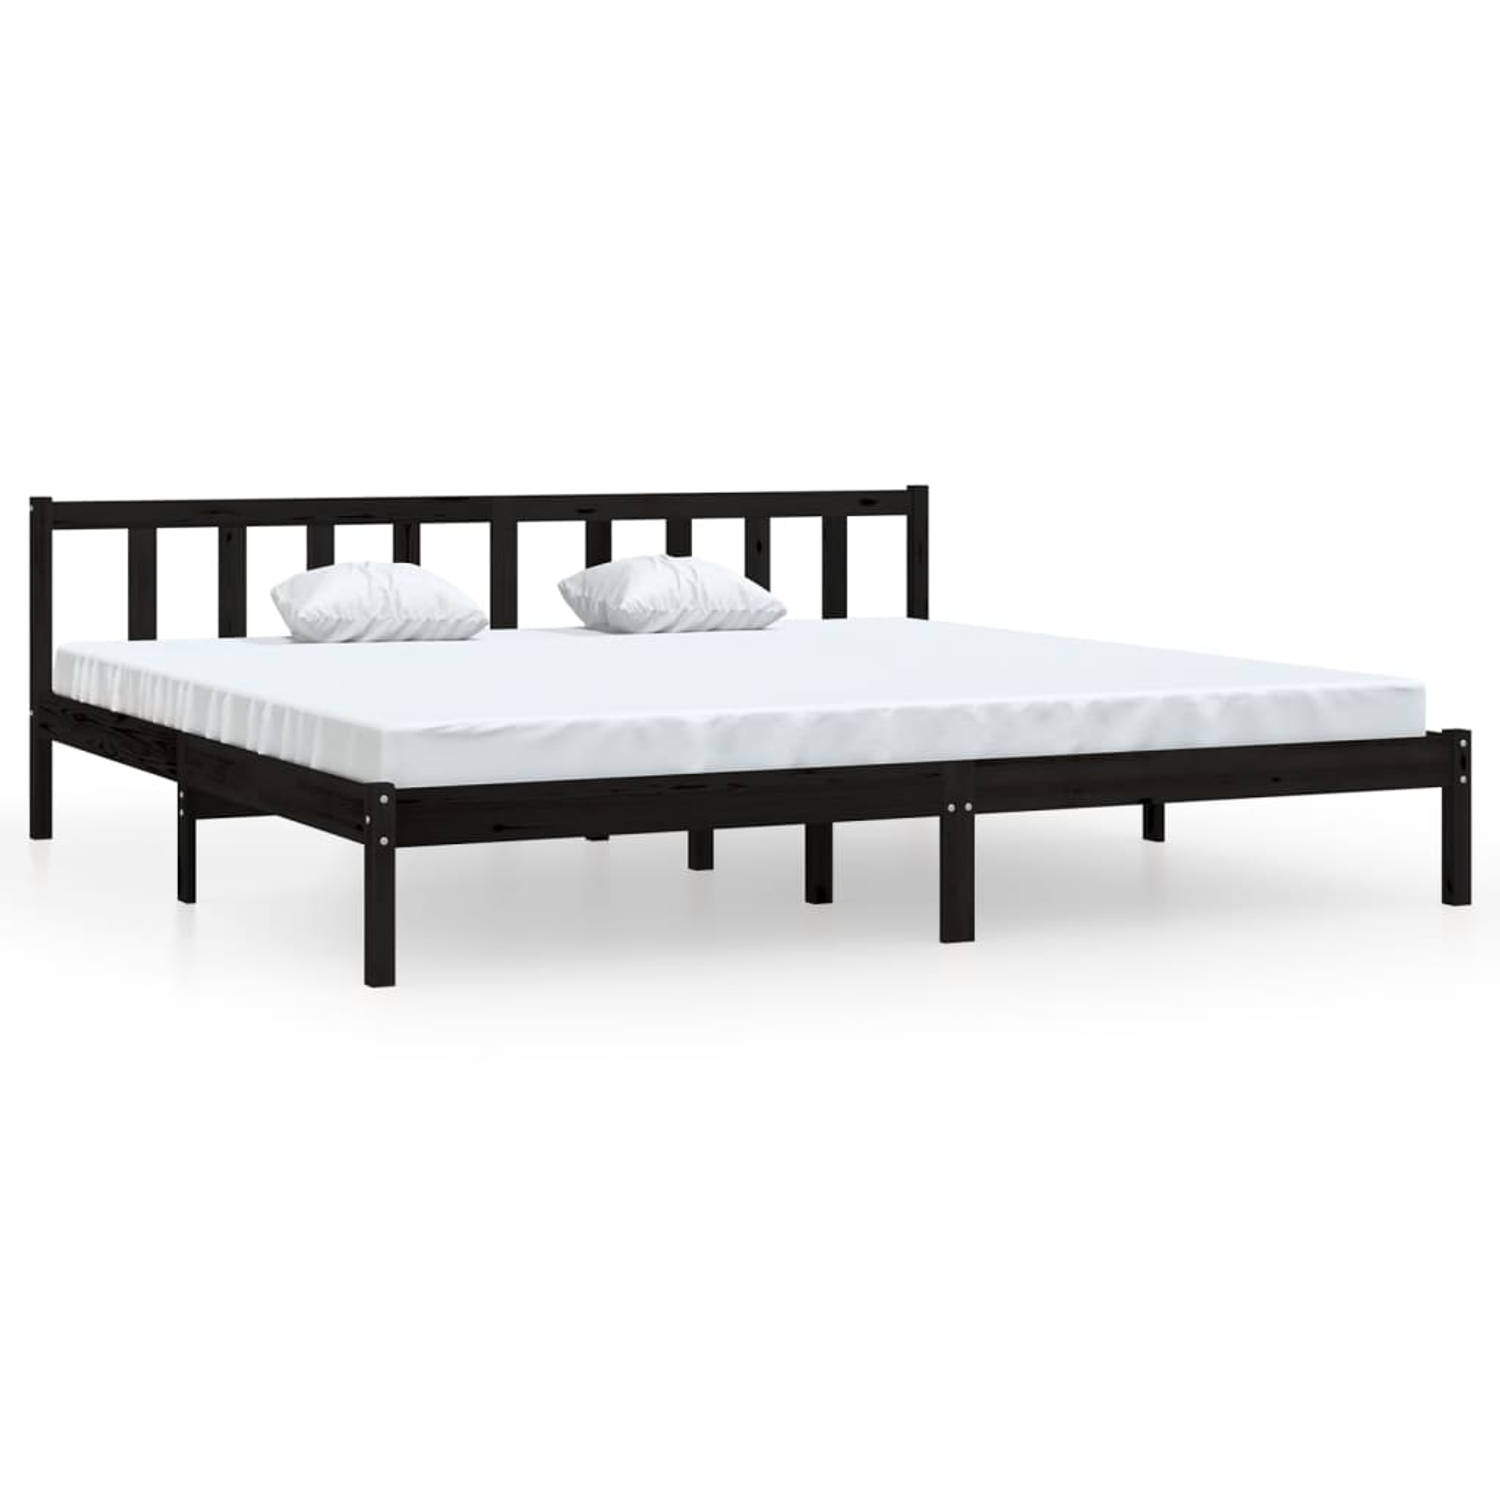 The Living Store Bedframe massief grenenhout zwart 200x200 cm - Bedframe - Bedframe - Bed Frame - Bed Frames - Bed - Bedden - 1-persoonsbed - 1-persoonsbedden - Eenpersoons Bed